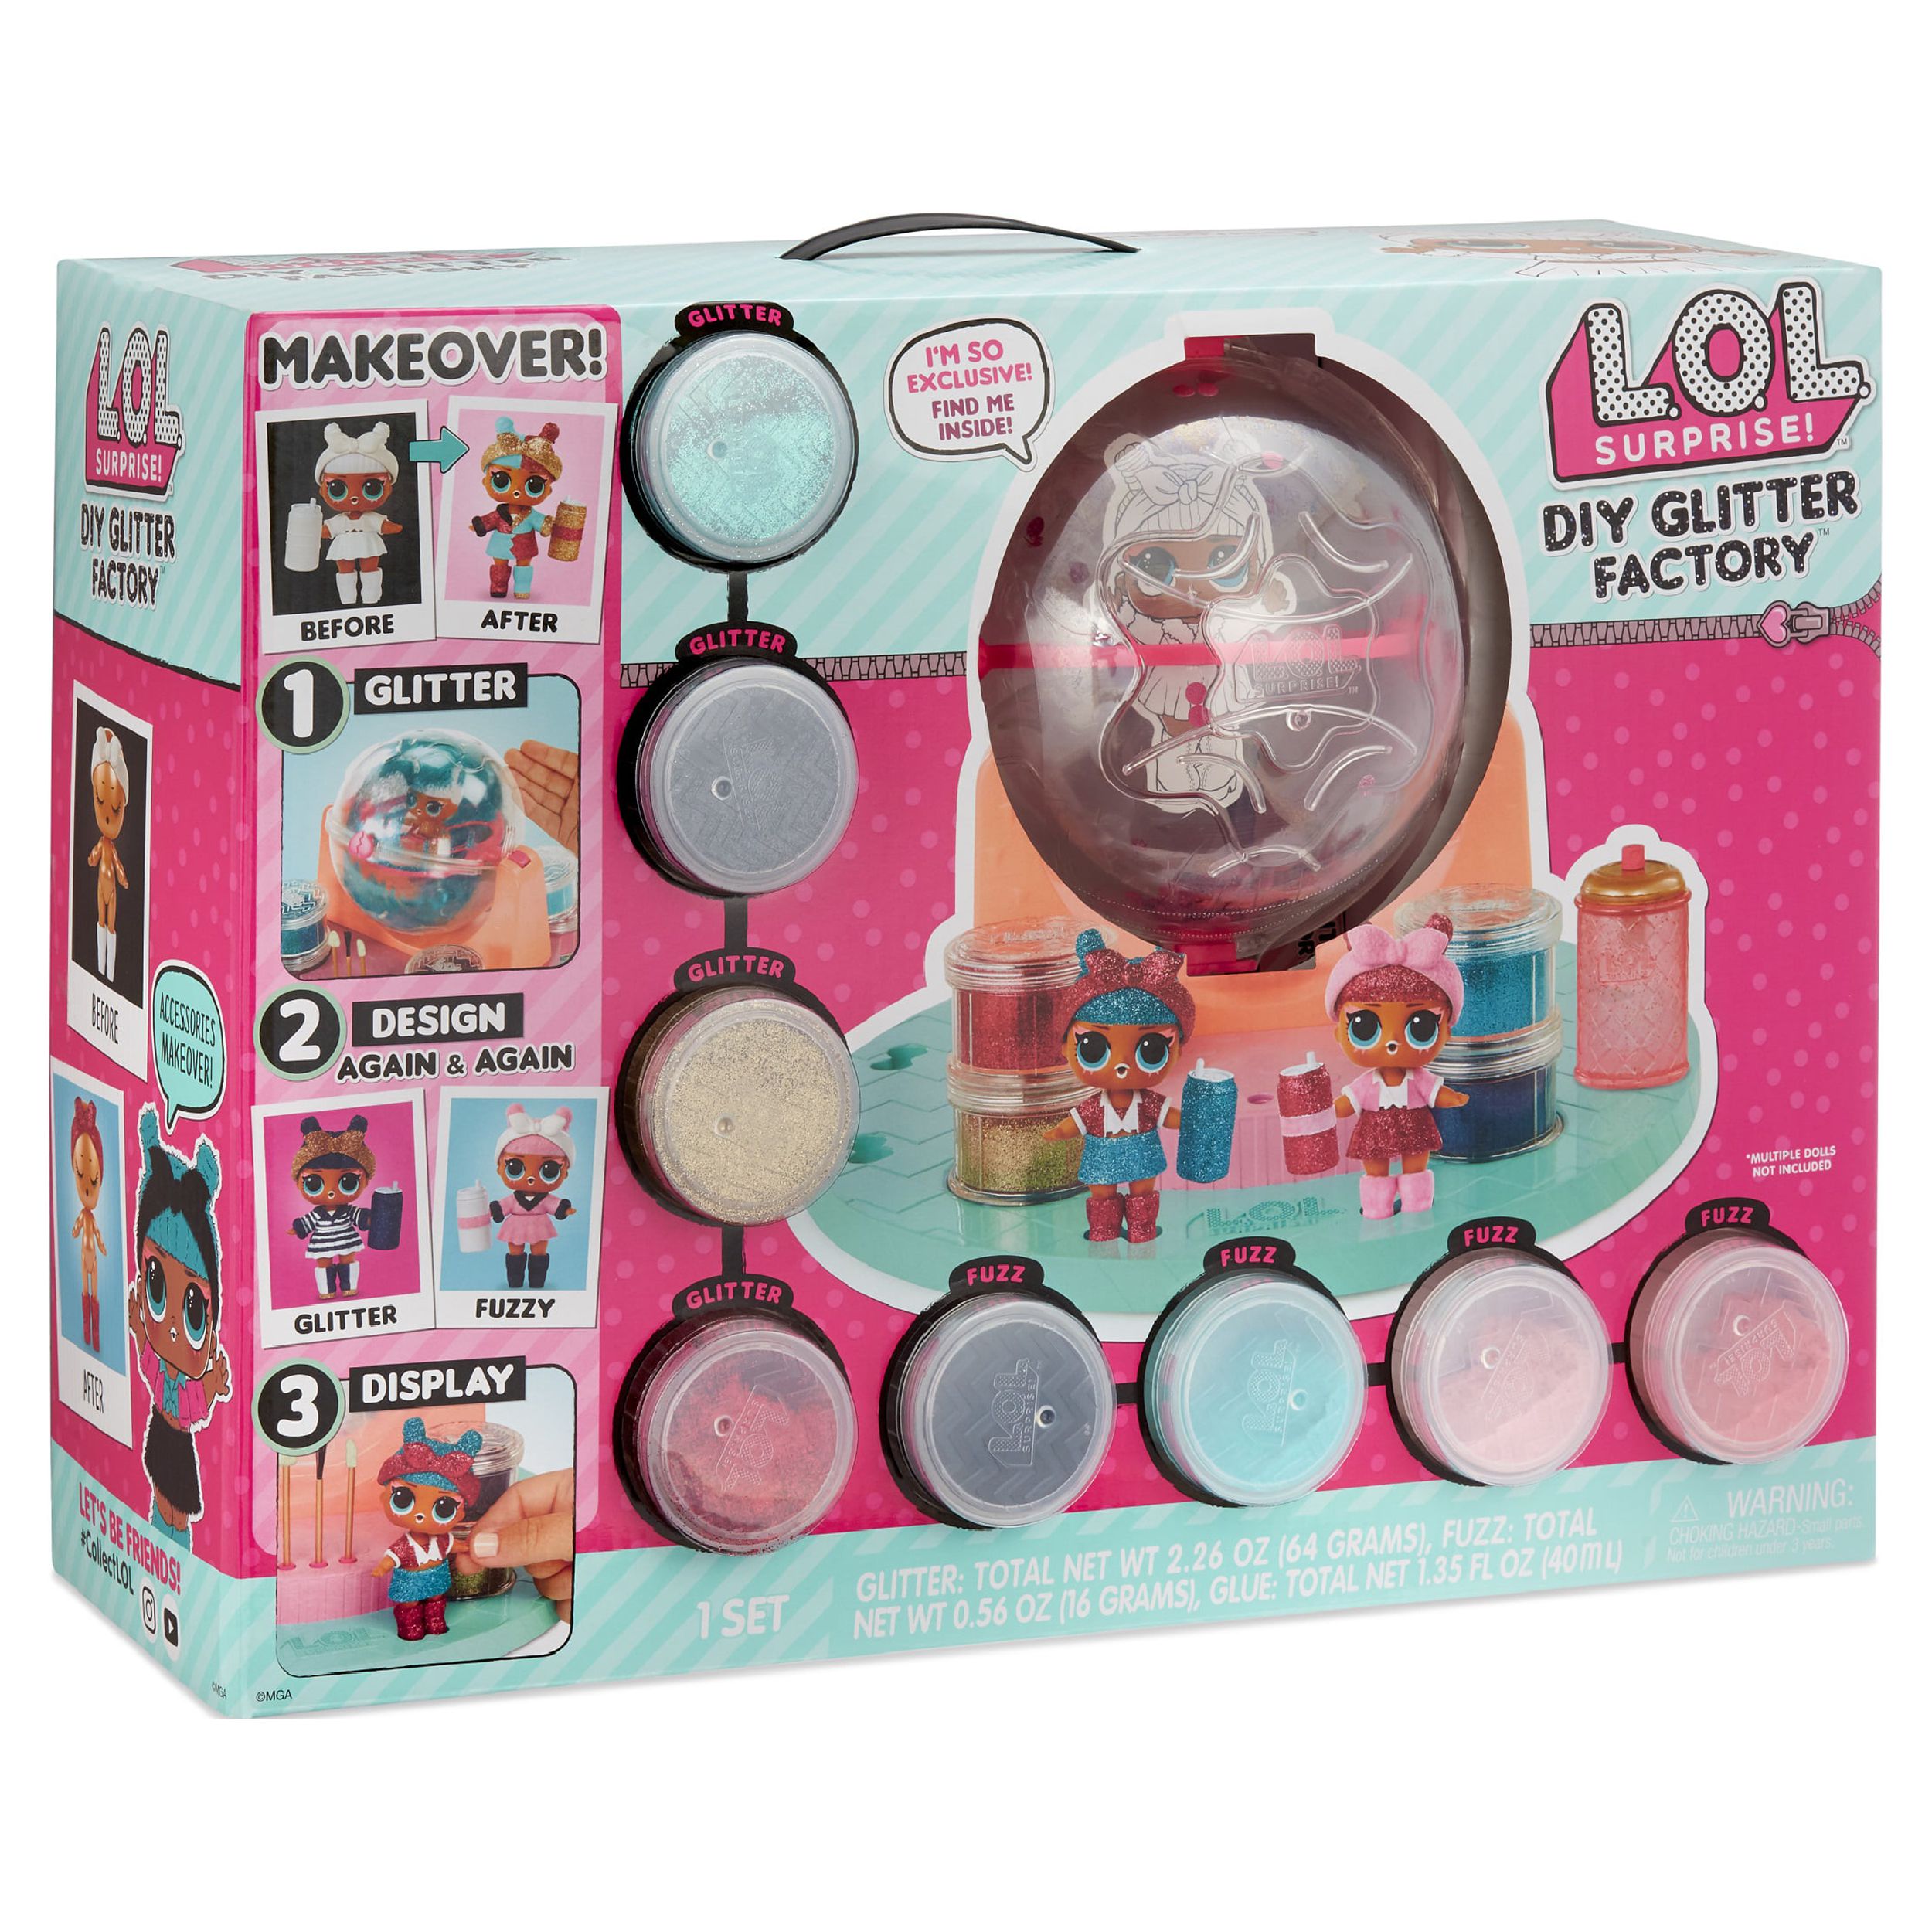 LOL Surprise DIY Glitter Factory Playset With Exclusive Doll, Great Gift for Kids Ages 4 5 6+ - image 2 of 2